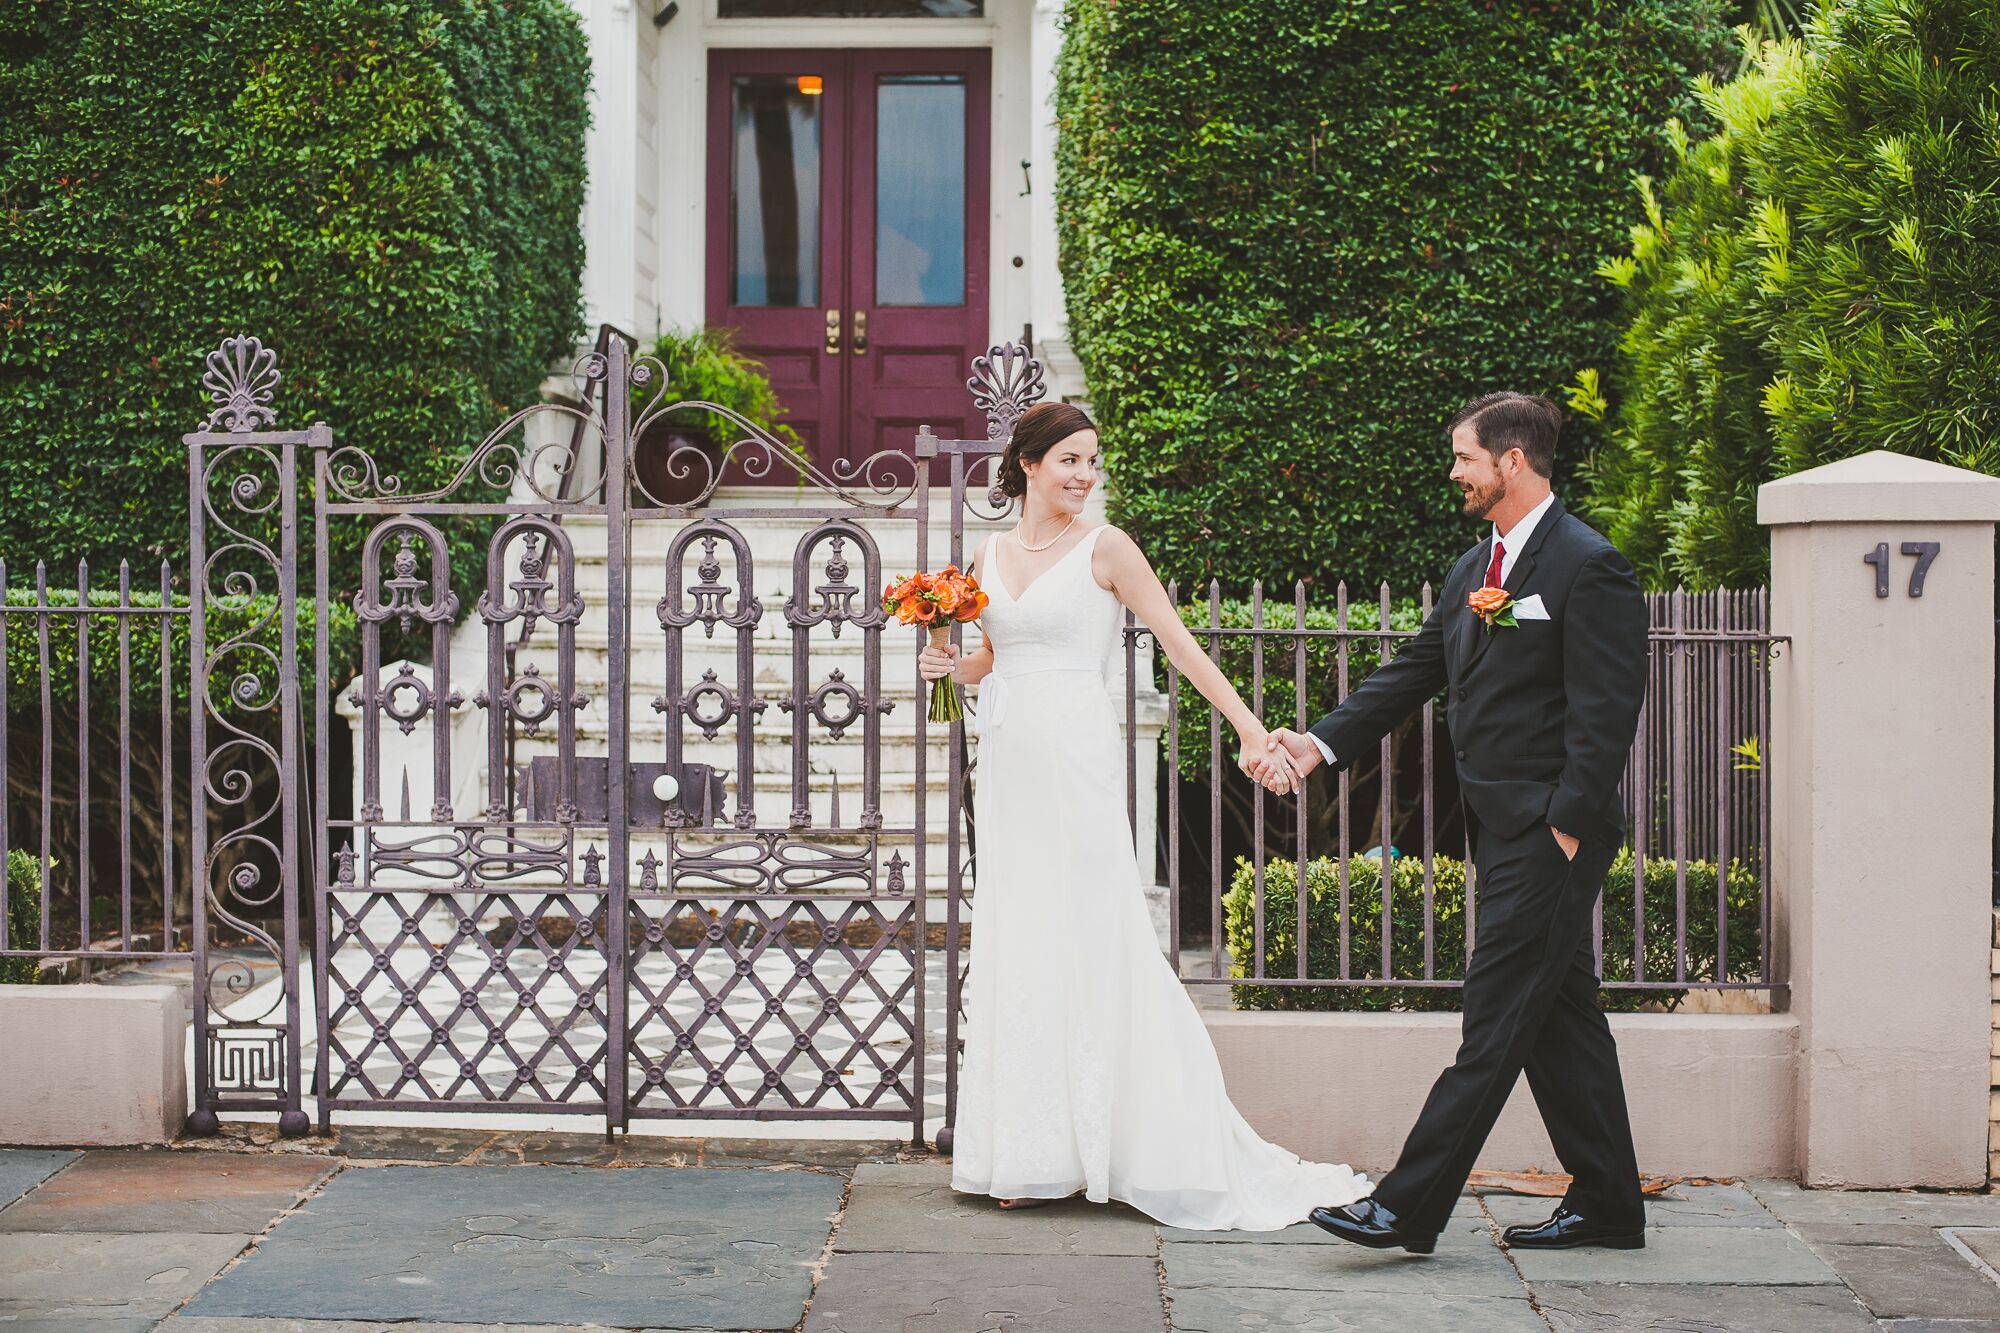 An Intimate Park Wedding At White Point Gardens Gazebo In Downtown